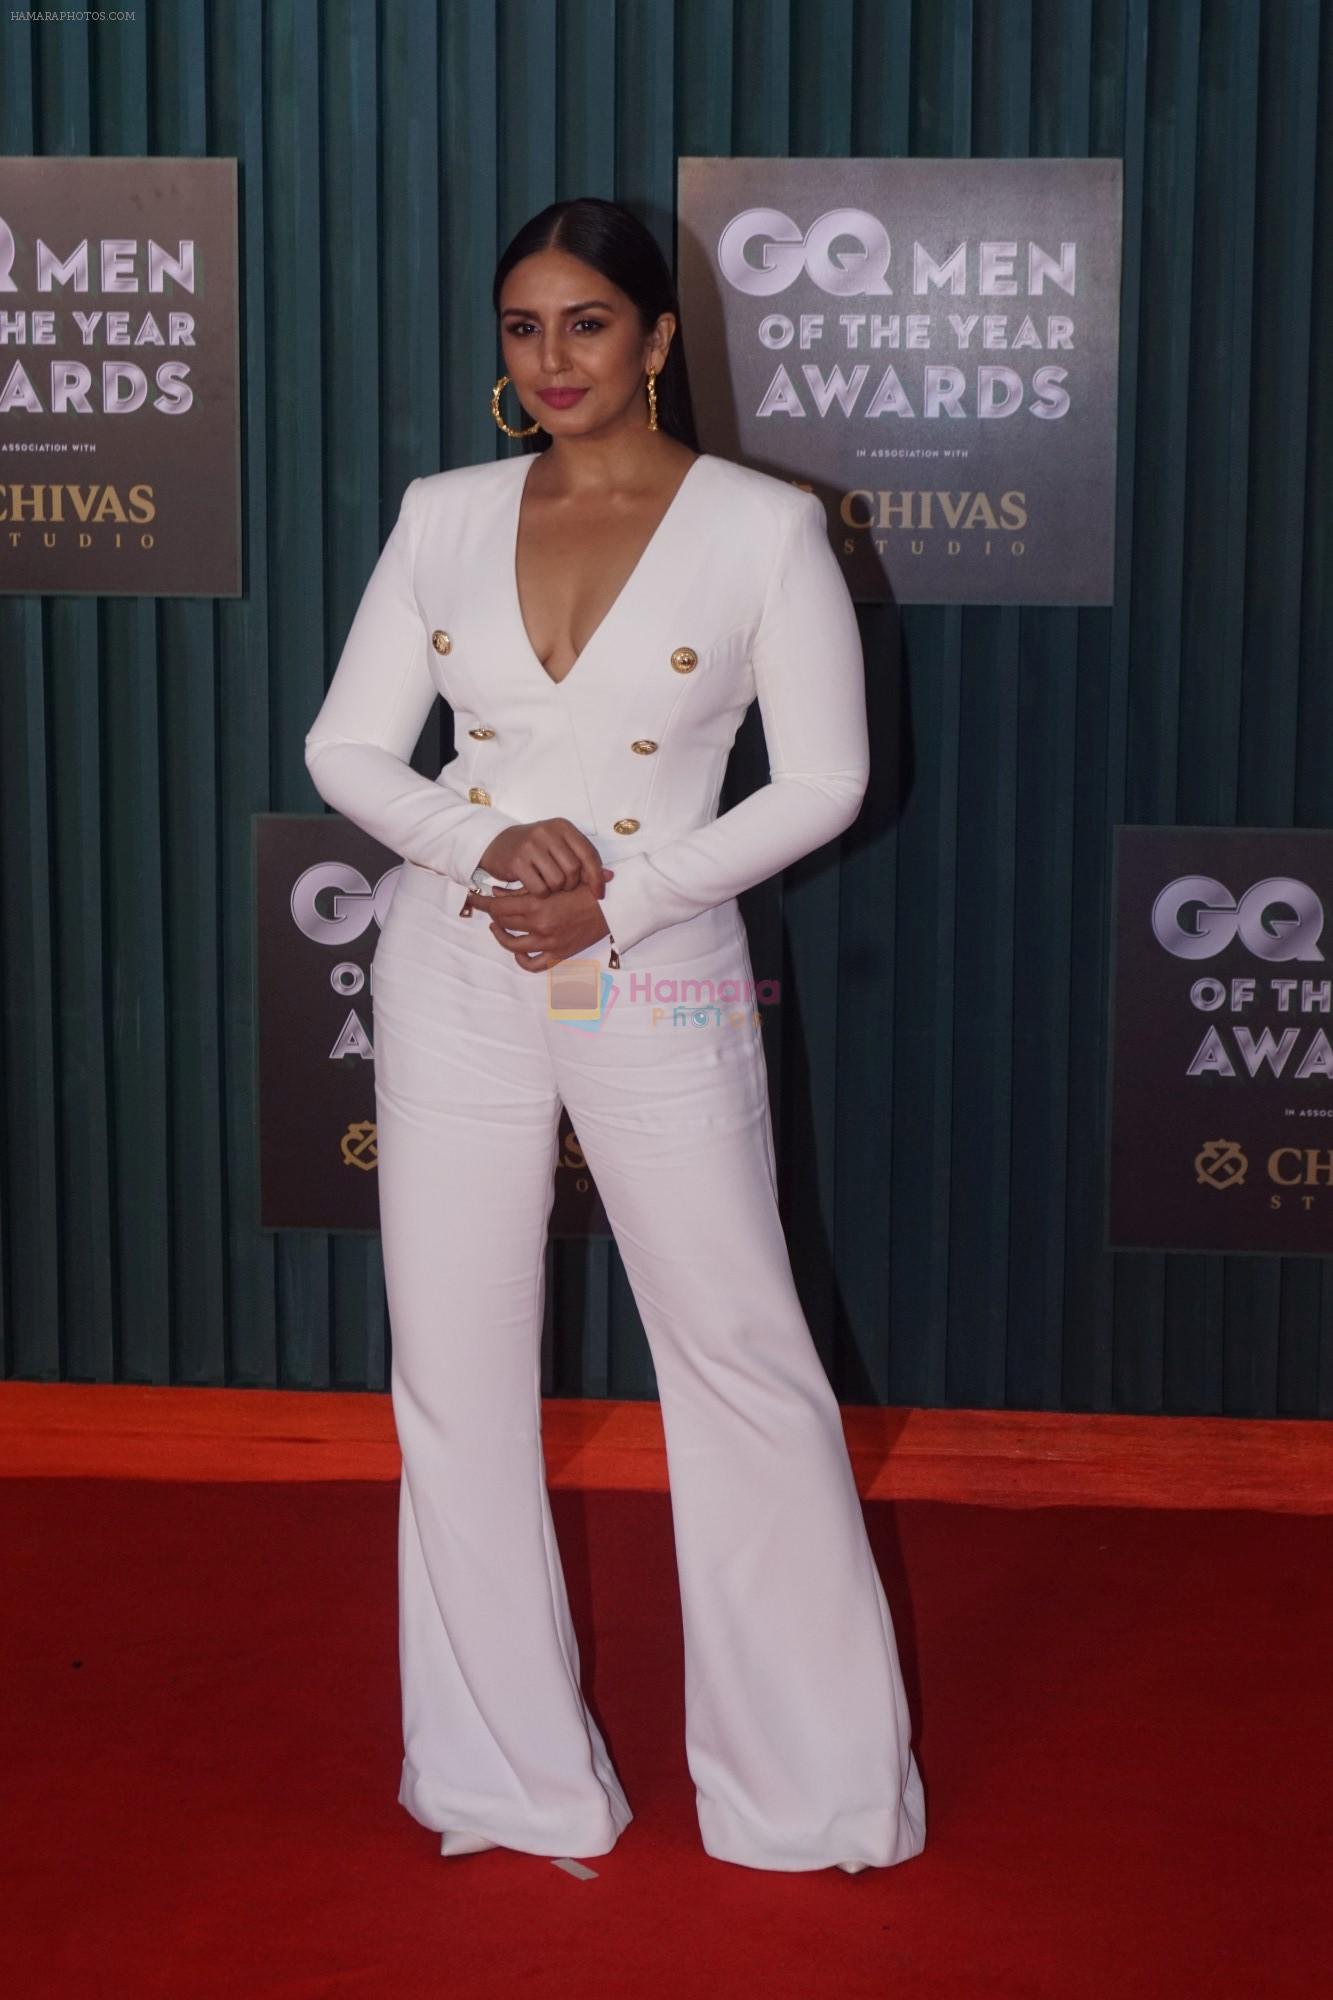 Huma Qureshi at GQ Men of the Year Awards 2018 on 27th Sept 2018